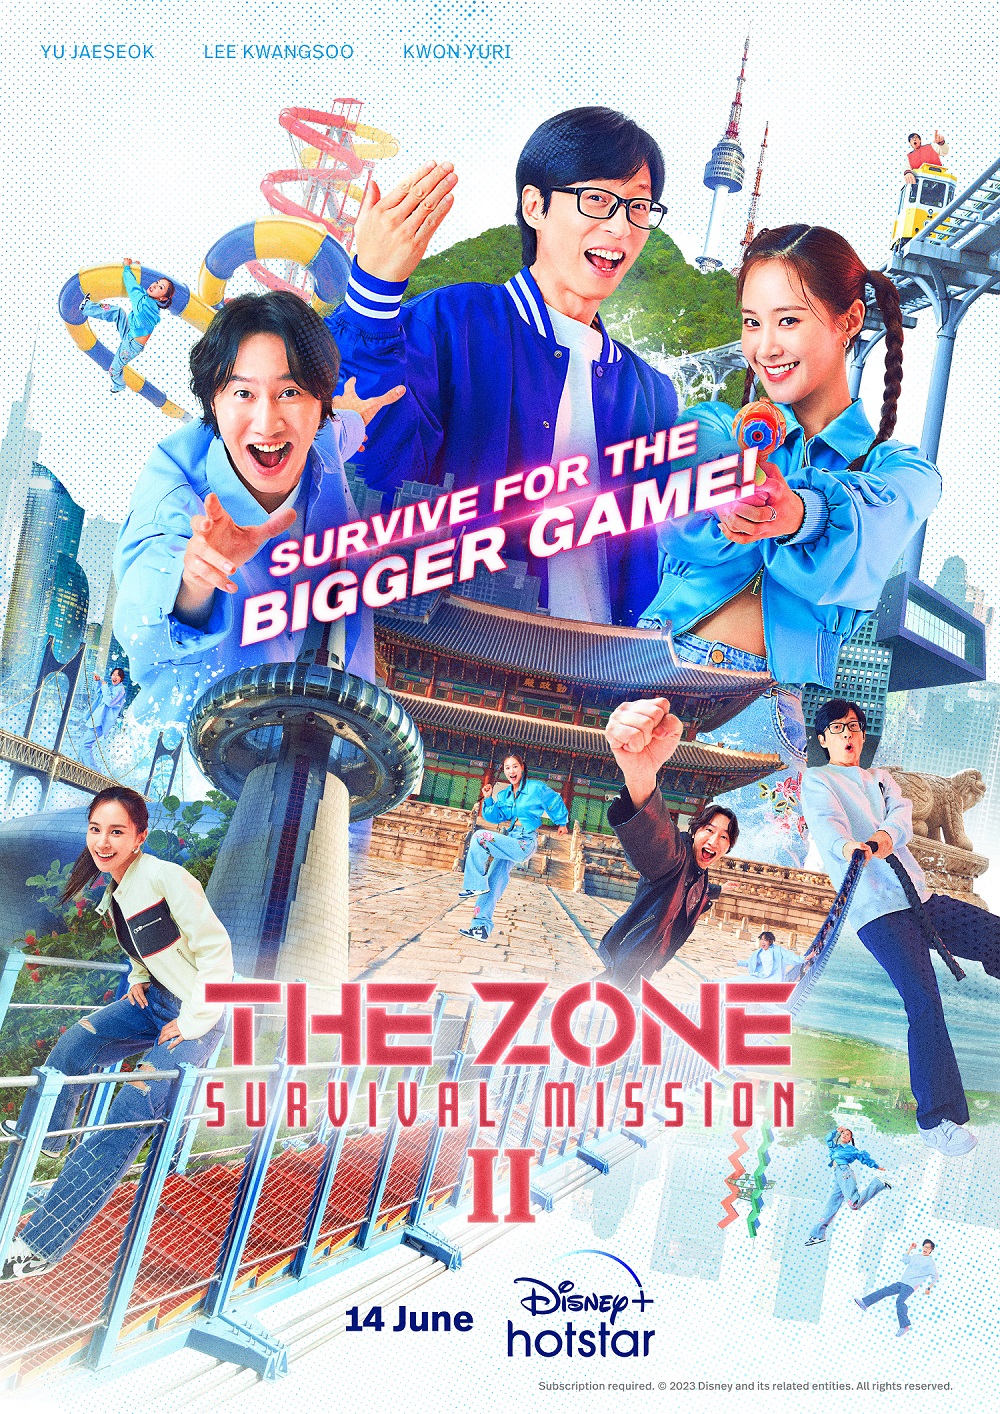 THE ZONE: Survival Mission 2